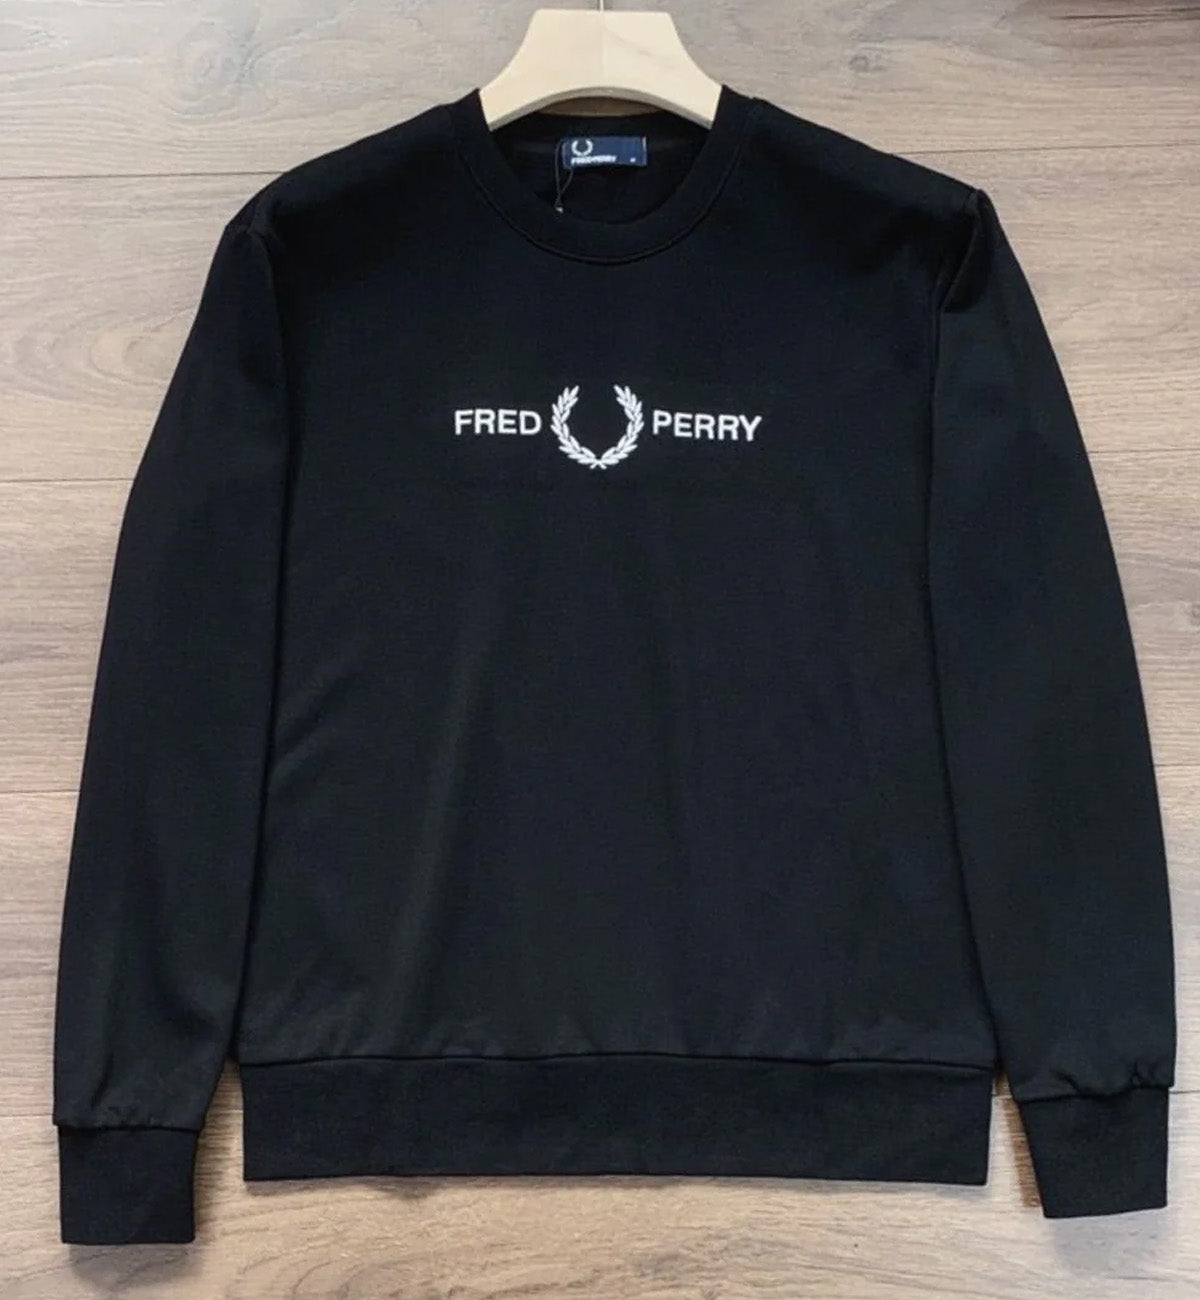 Fred Perry Graphic Sweatshirt (Black)